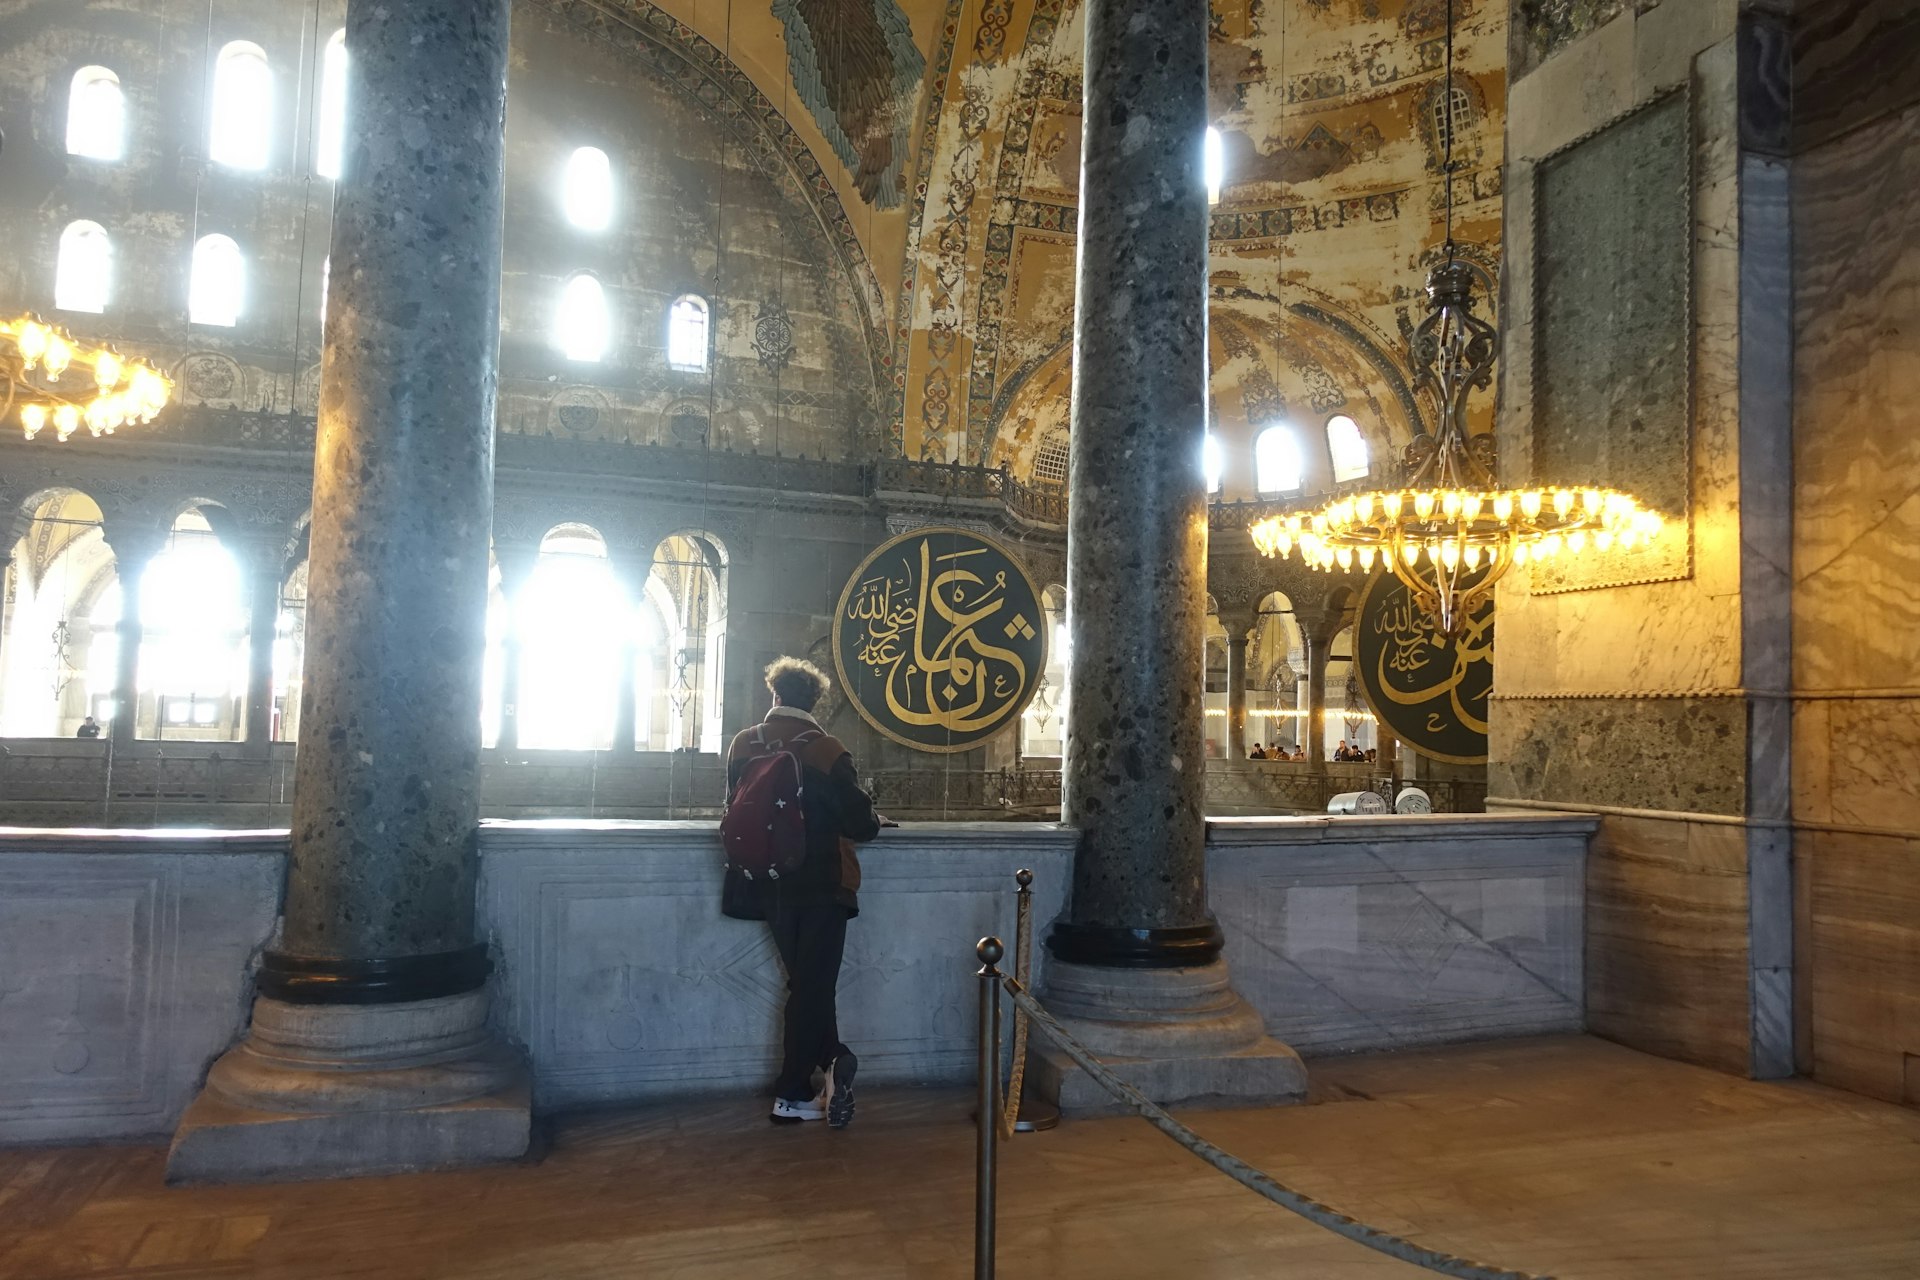 Image of the interior of Hagia Sophia showing a visitor observing the space. Large columns and a circular chandelier are visible, with Islamic calligraphic panels mounted on the walls. The ceilings showcase intricate designs, and the area is illuminated by natural light from the windows.